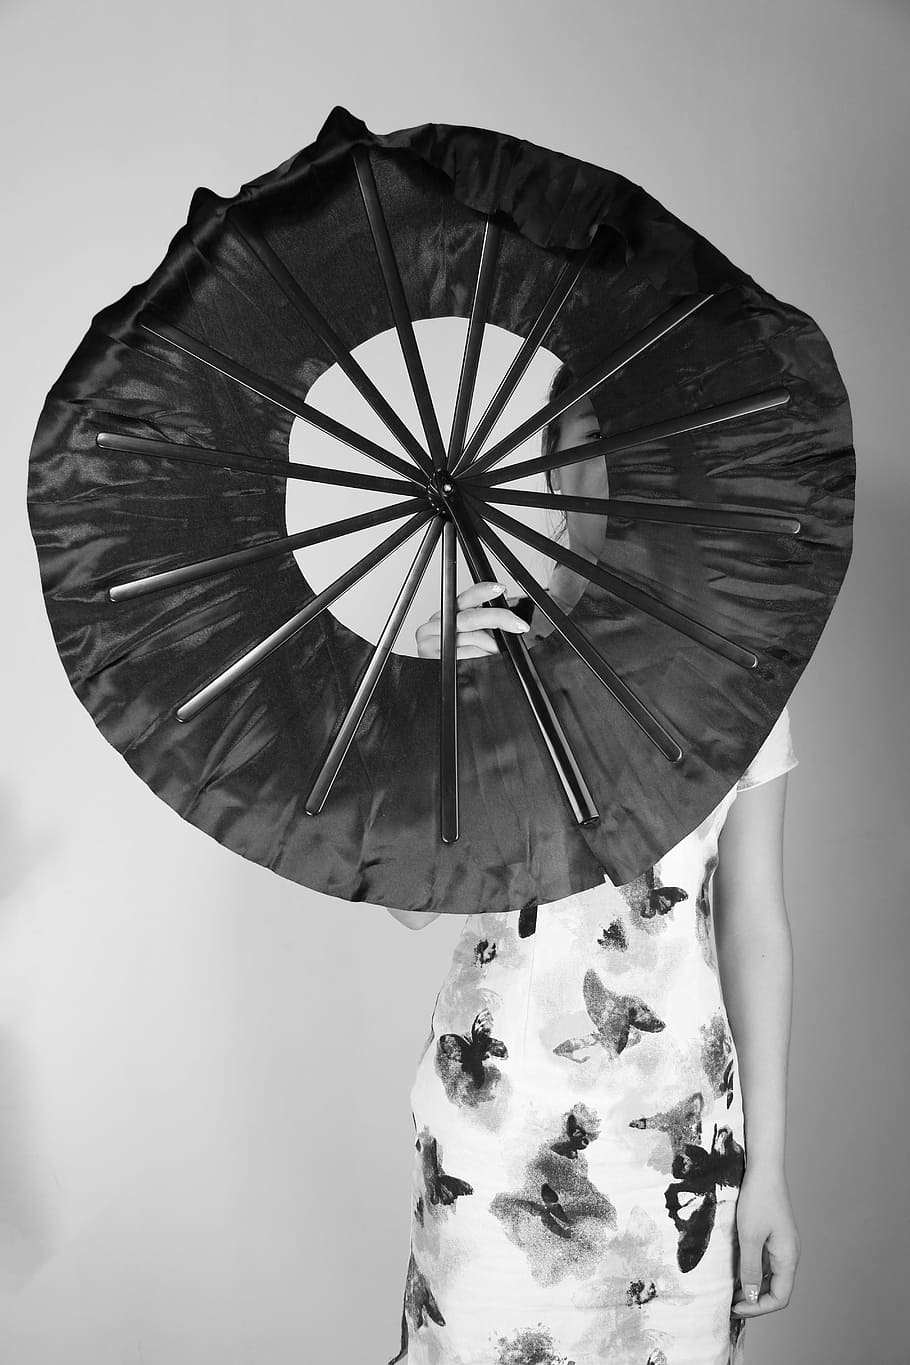 fan, classical, cheongsam, beauty, one person, umbrella, real people